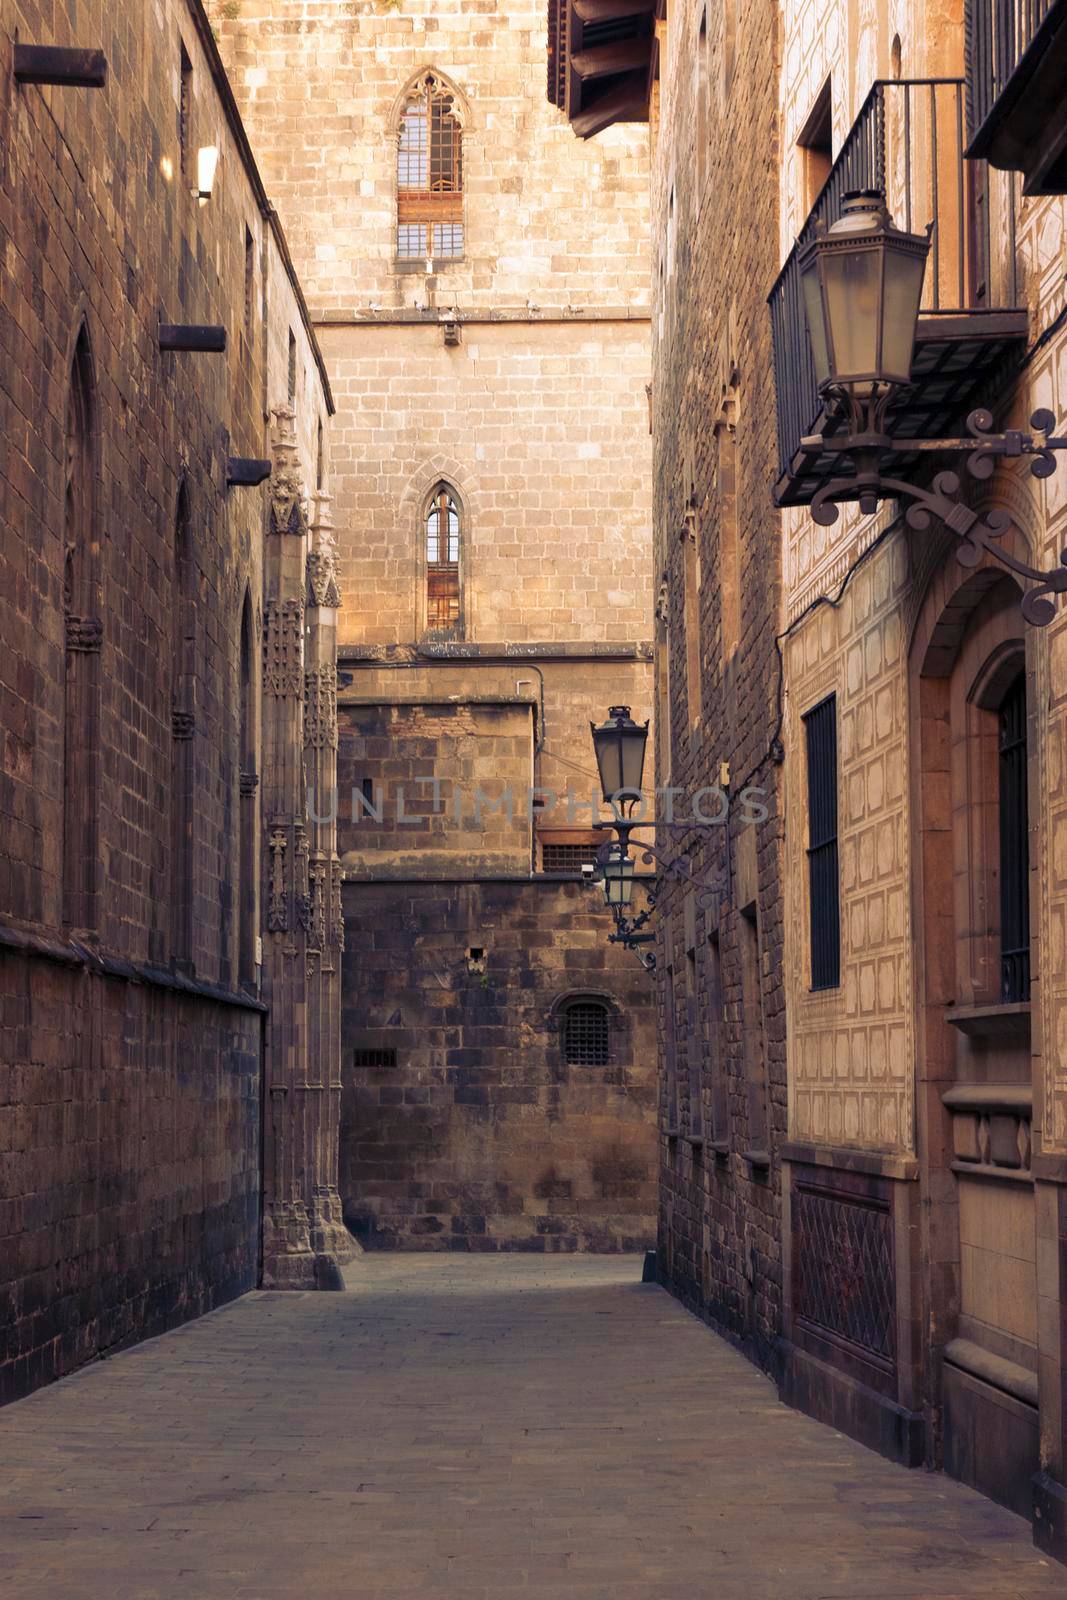 narrow space between tall medieval buildings in famous Gothic Quarter in Barcelona